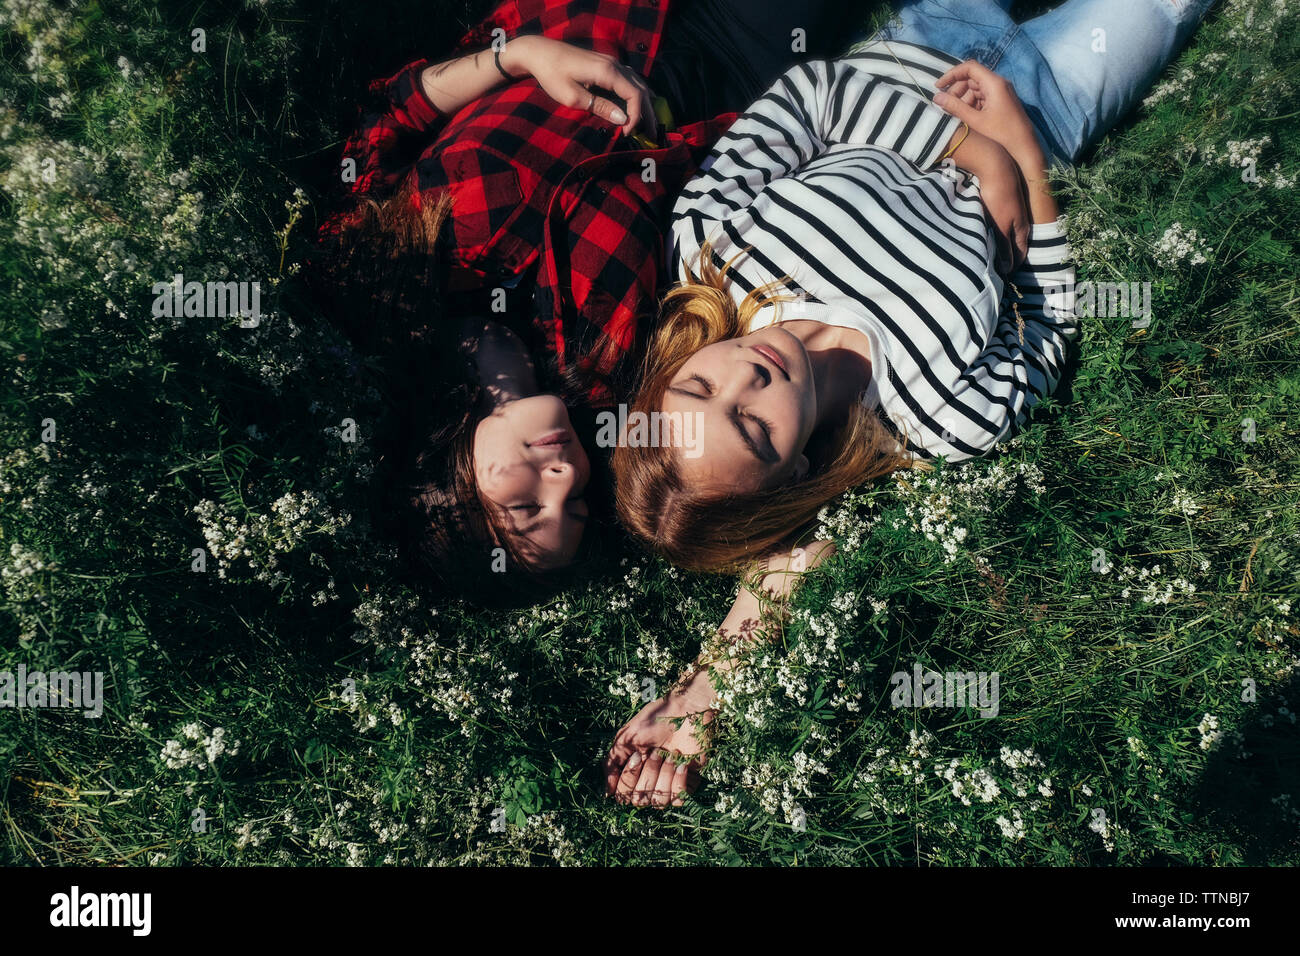 High angle view of female friends napping on grassy field Stock Photo